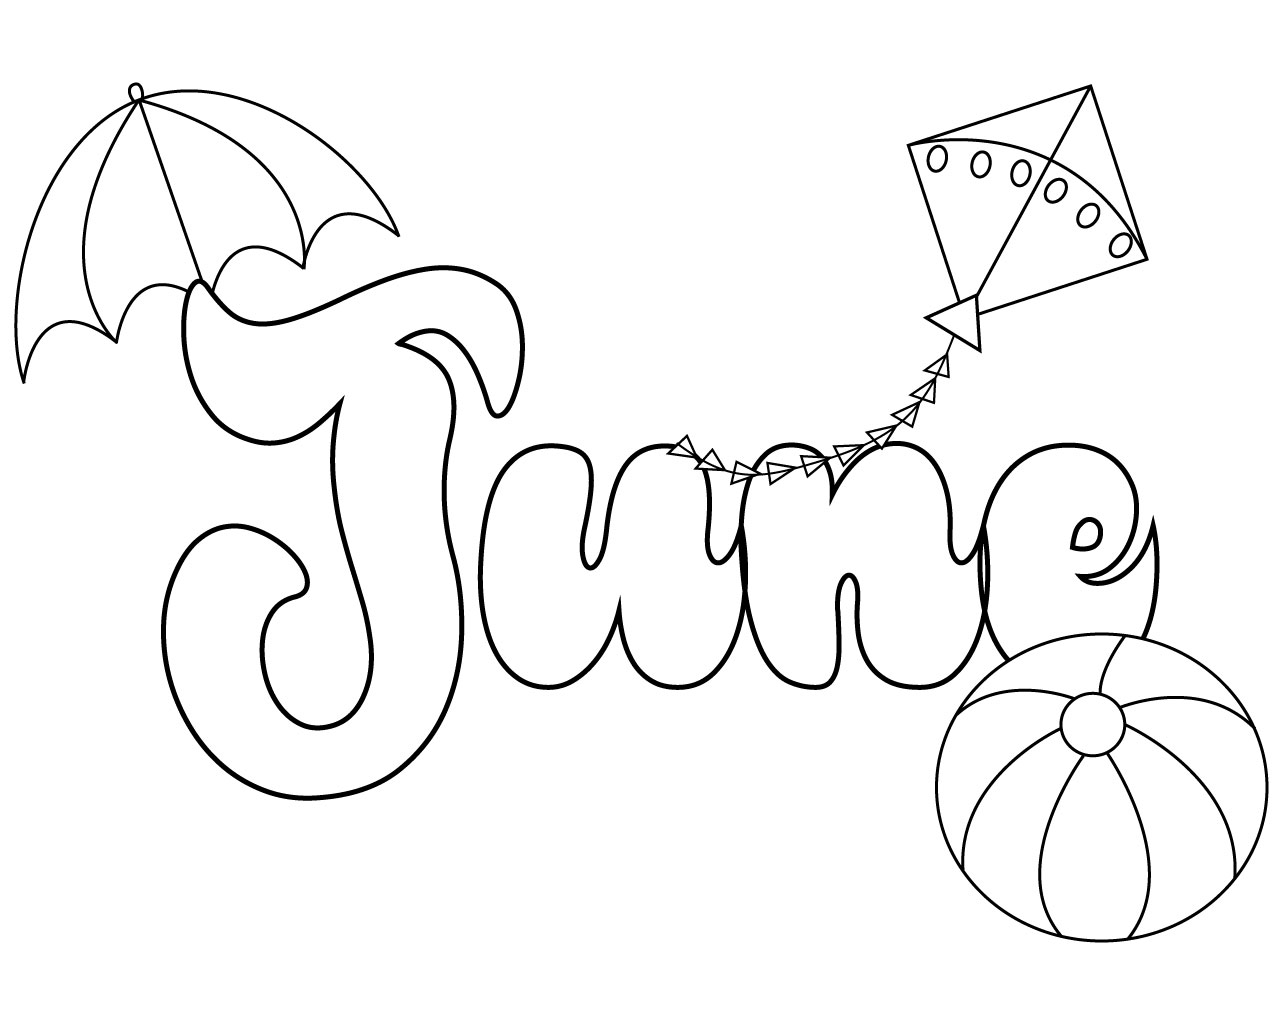 June Coloring Pages Free Printable